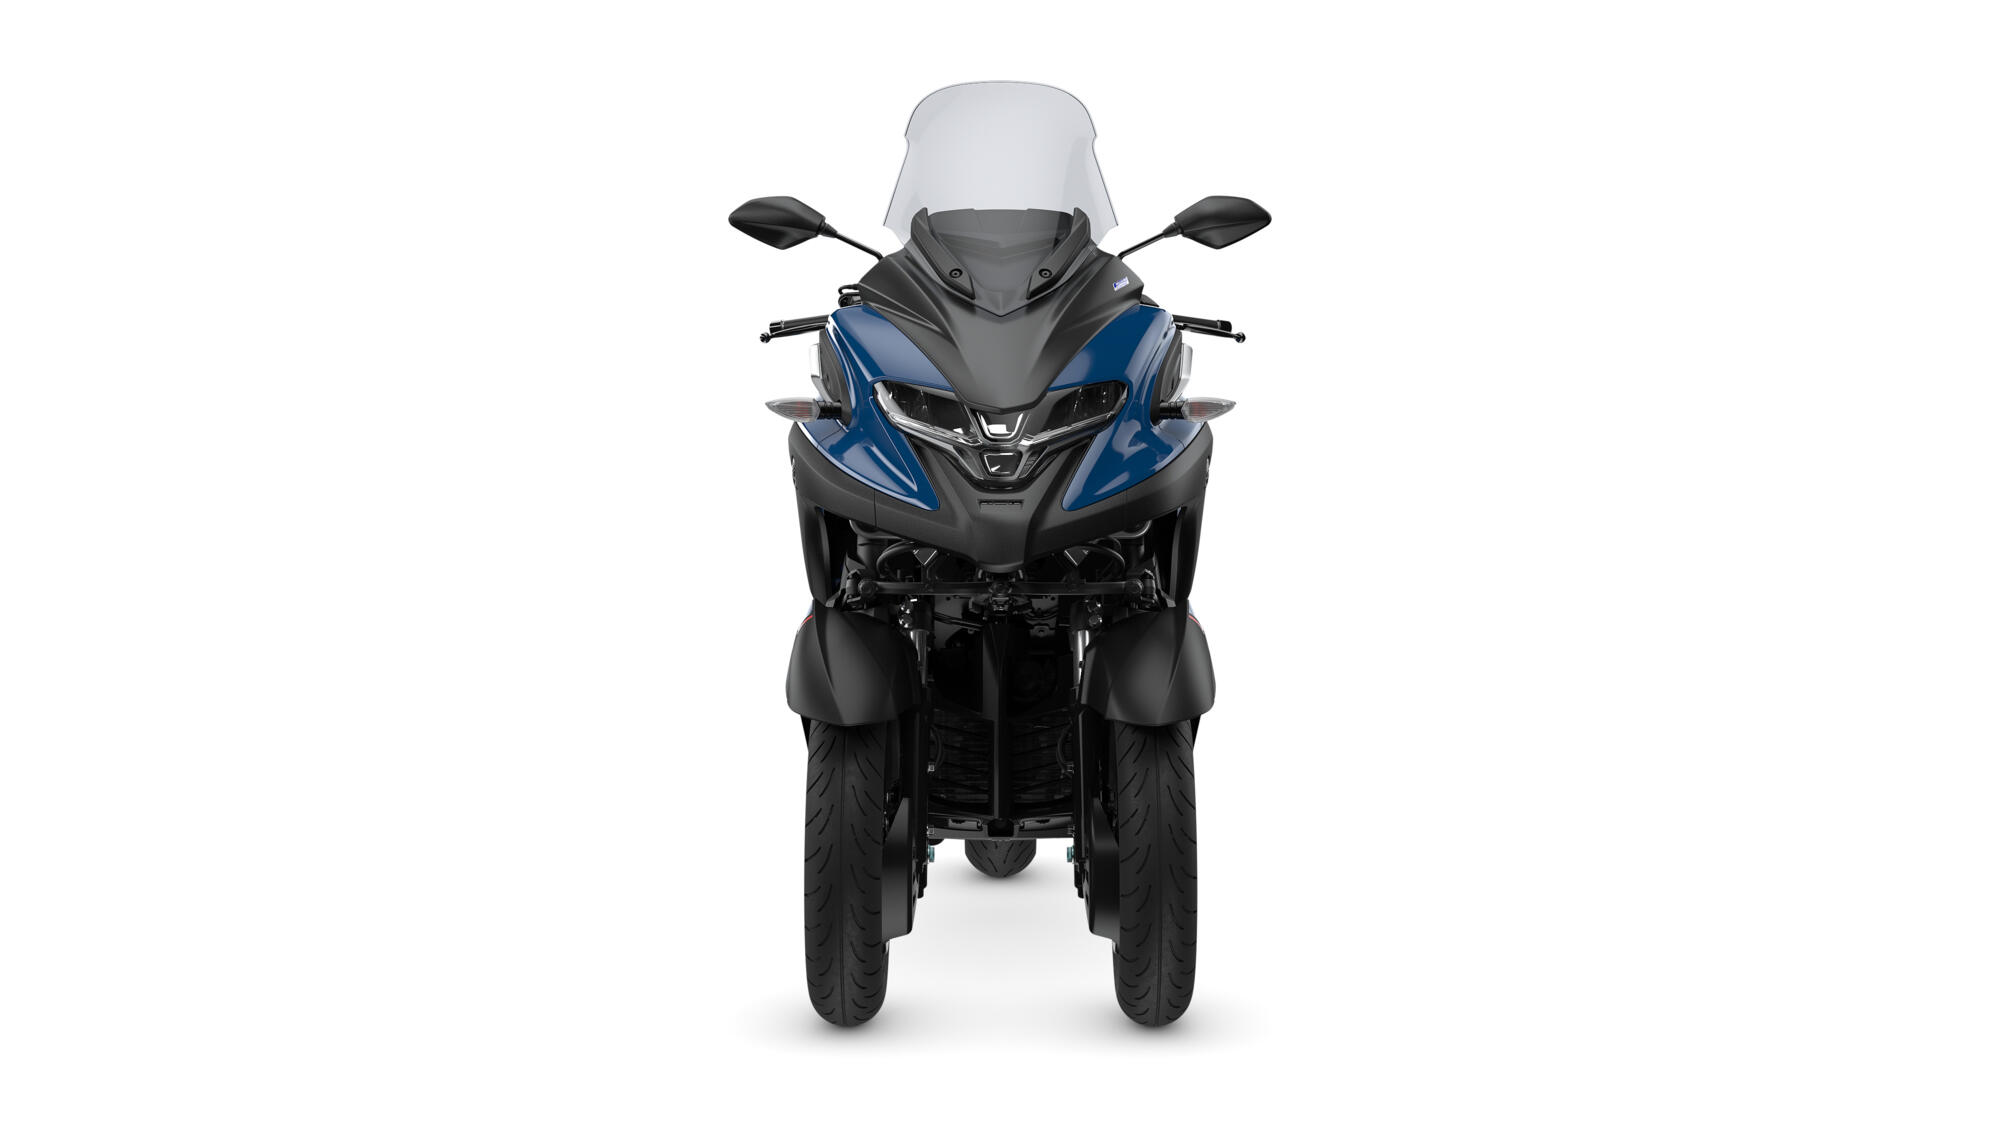 Yamaha three-wheeled scooter launched in the USA - BikeWale